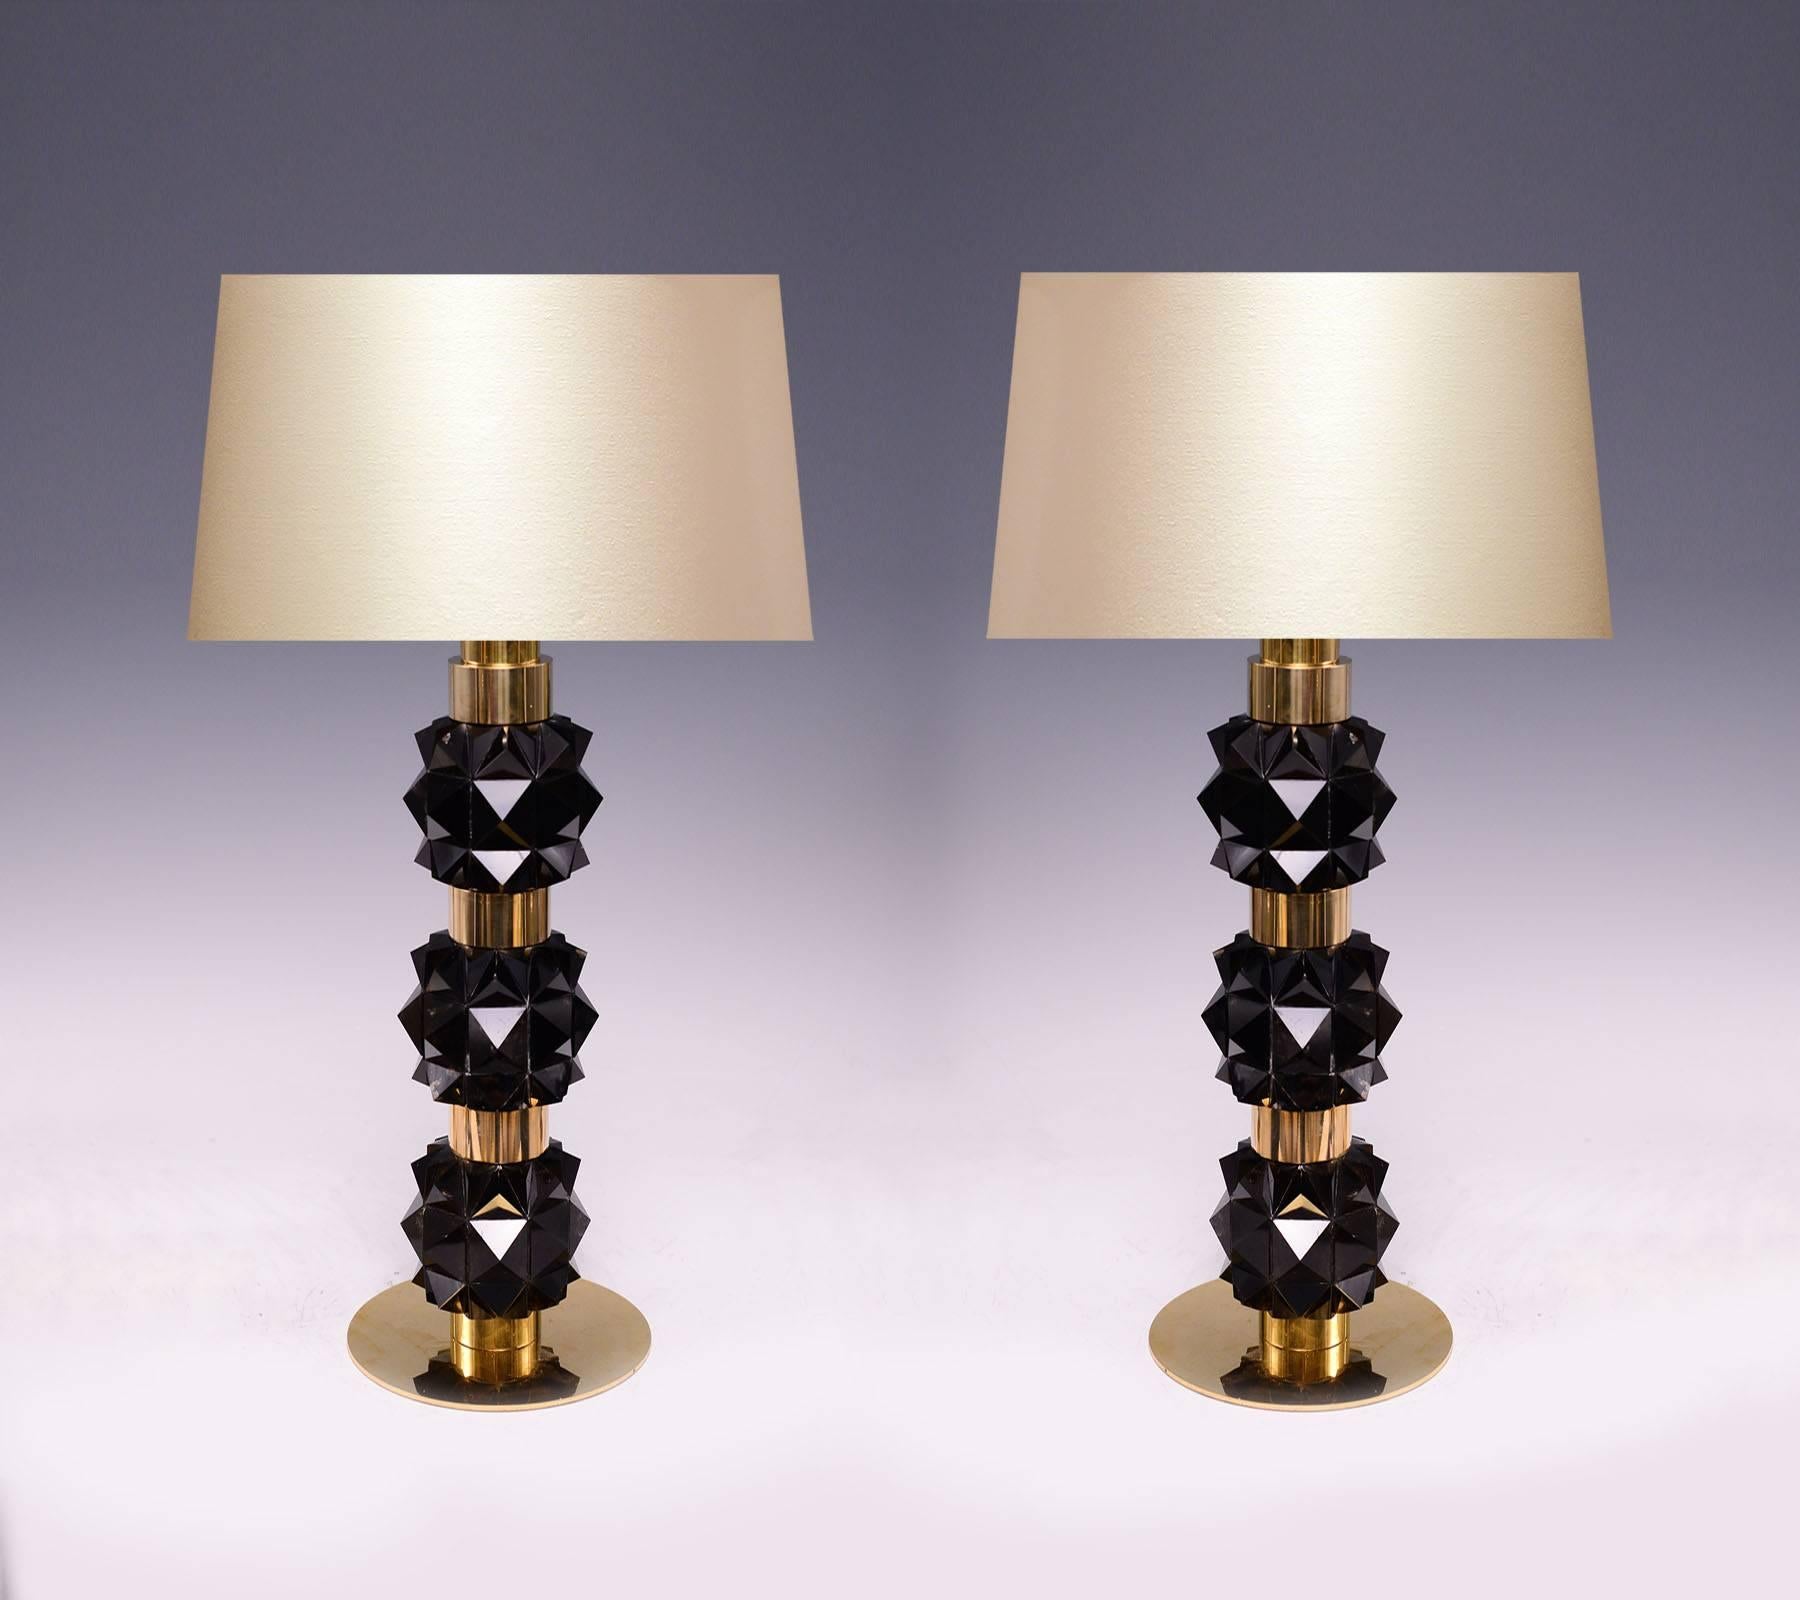 A pair of  rock candy dark rock crystal quartz lamps with polished brass decorations, created by Phoenix gallery.
Lampshade not included.
